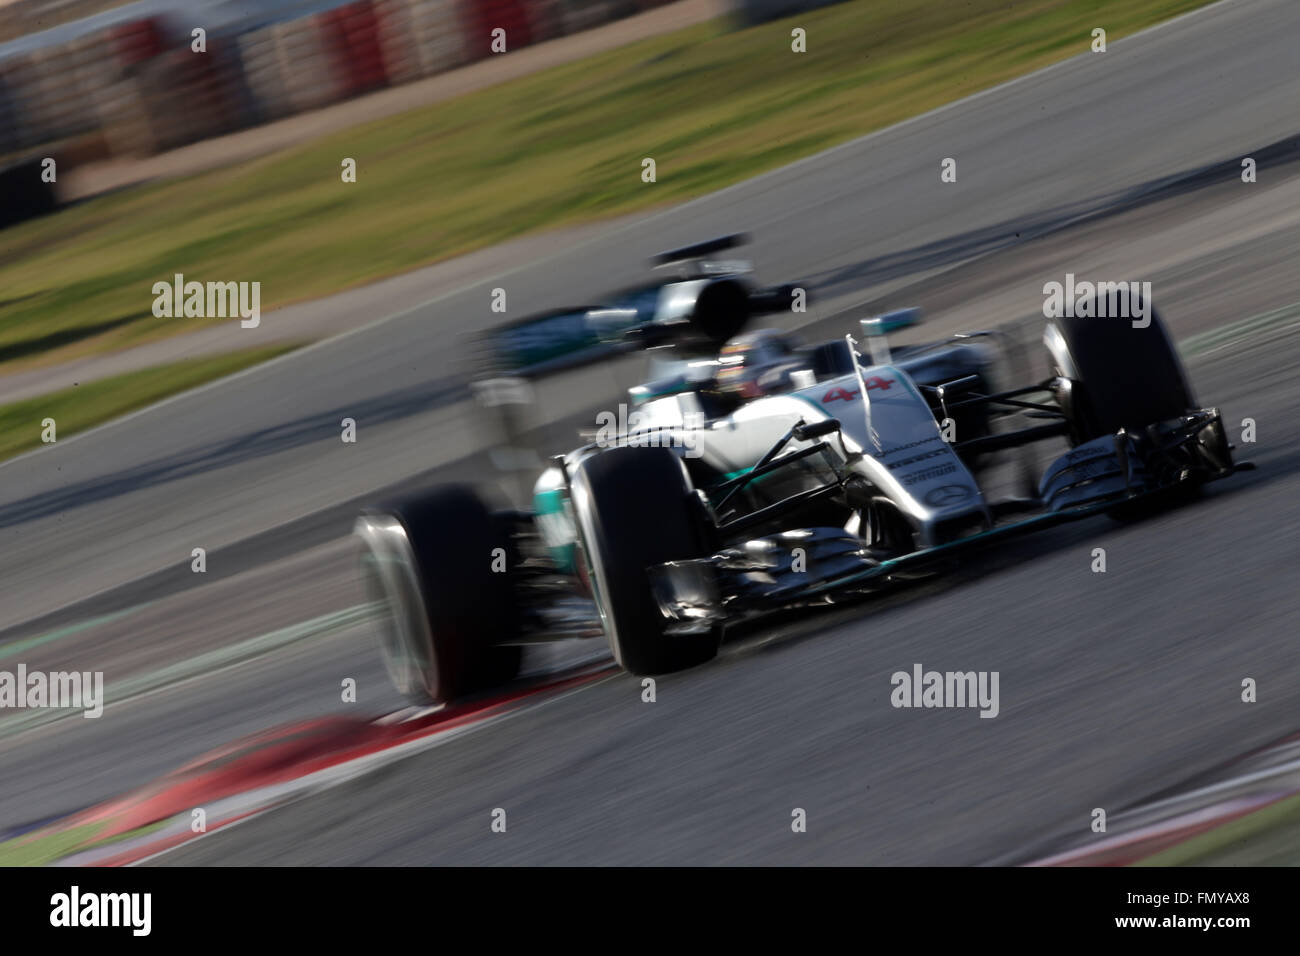 British Formula One driver Lewis Hamilton of Mercedes AMG steers his car during the training session for the upcoming Formula One season at the Circuit de Barcelona - Catalunya in Barcelona, Spain, 24 February 2016. Photo: Jens Buettner/dpa Stock Photo